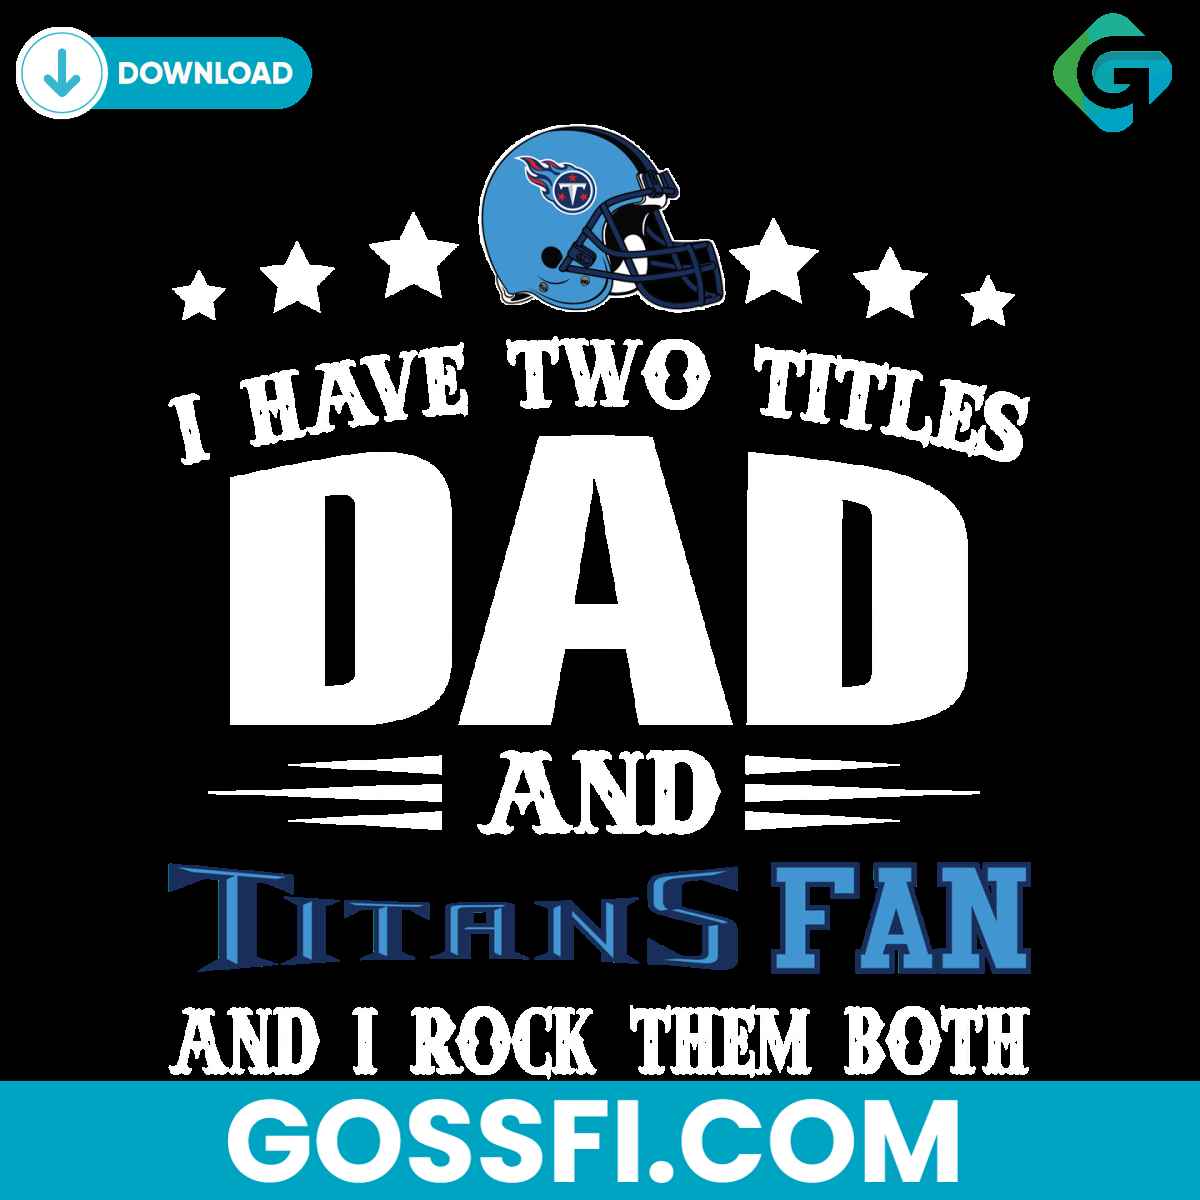 i-have-two-titles-dad-and-titans-fan-svg